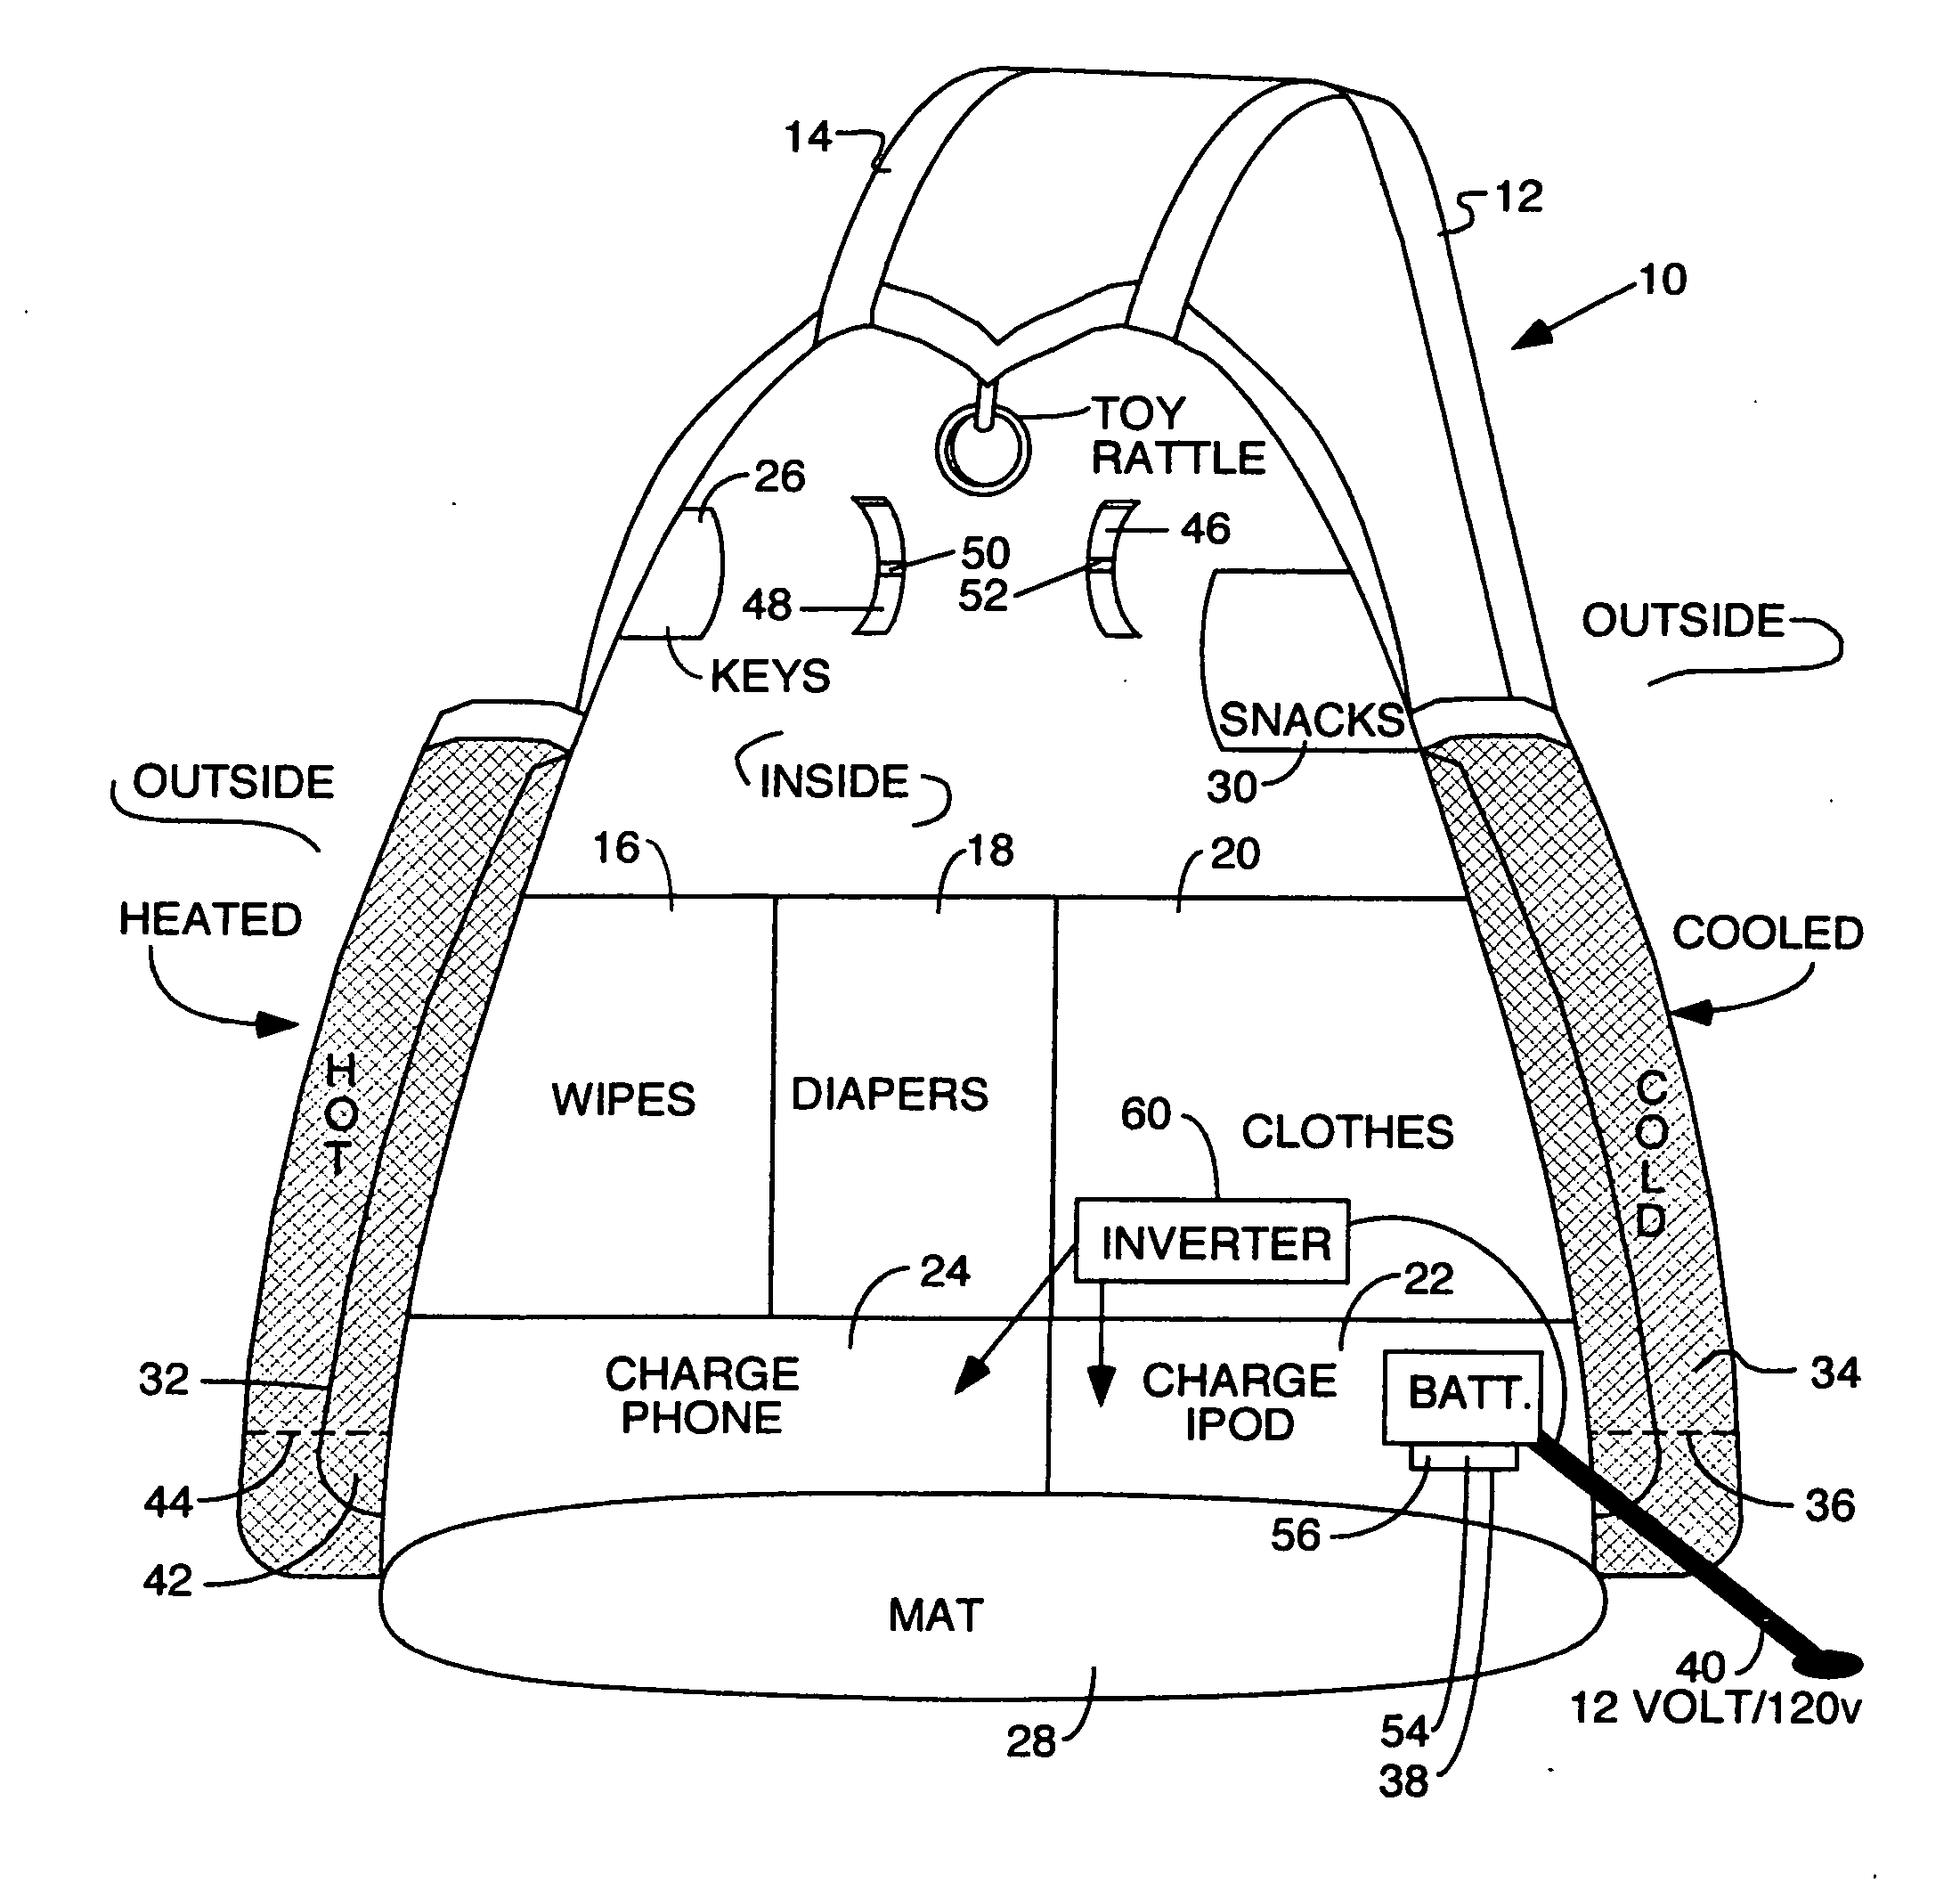 Diaper bag with heated and cooled compartments